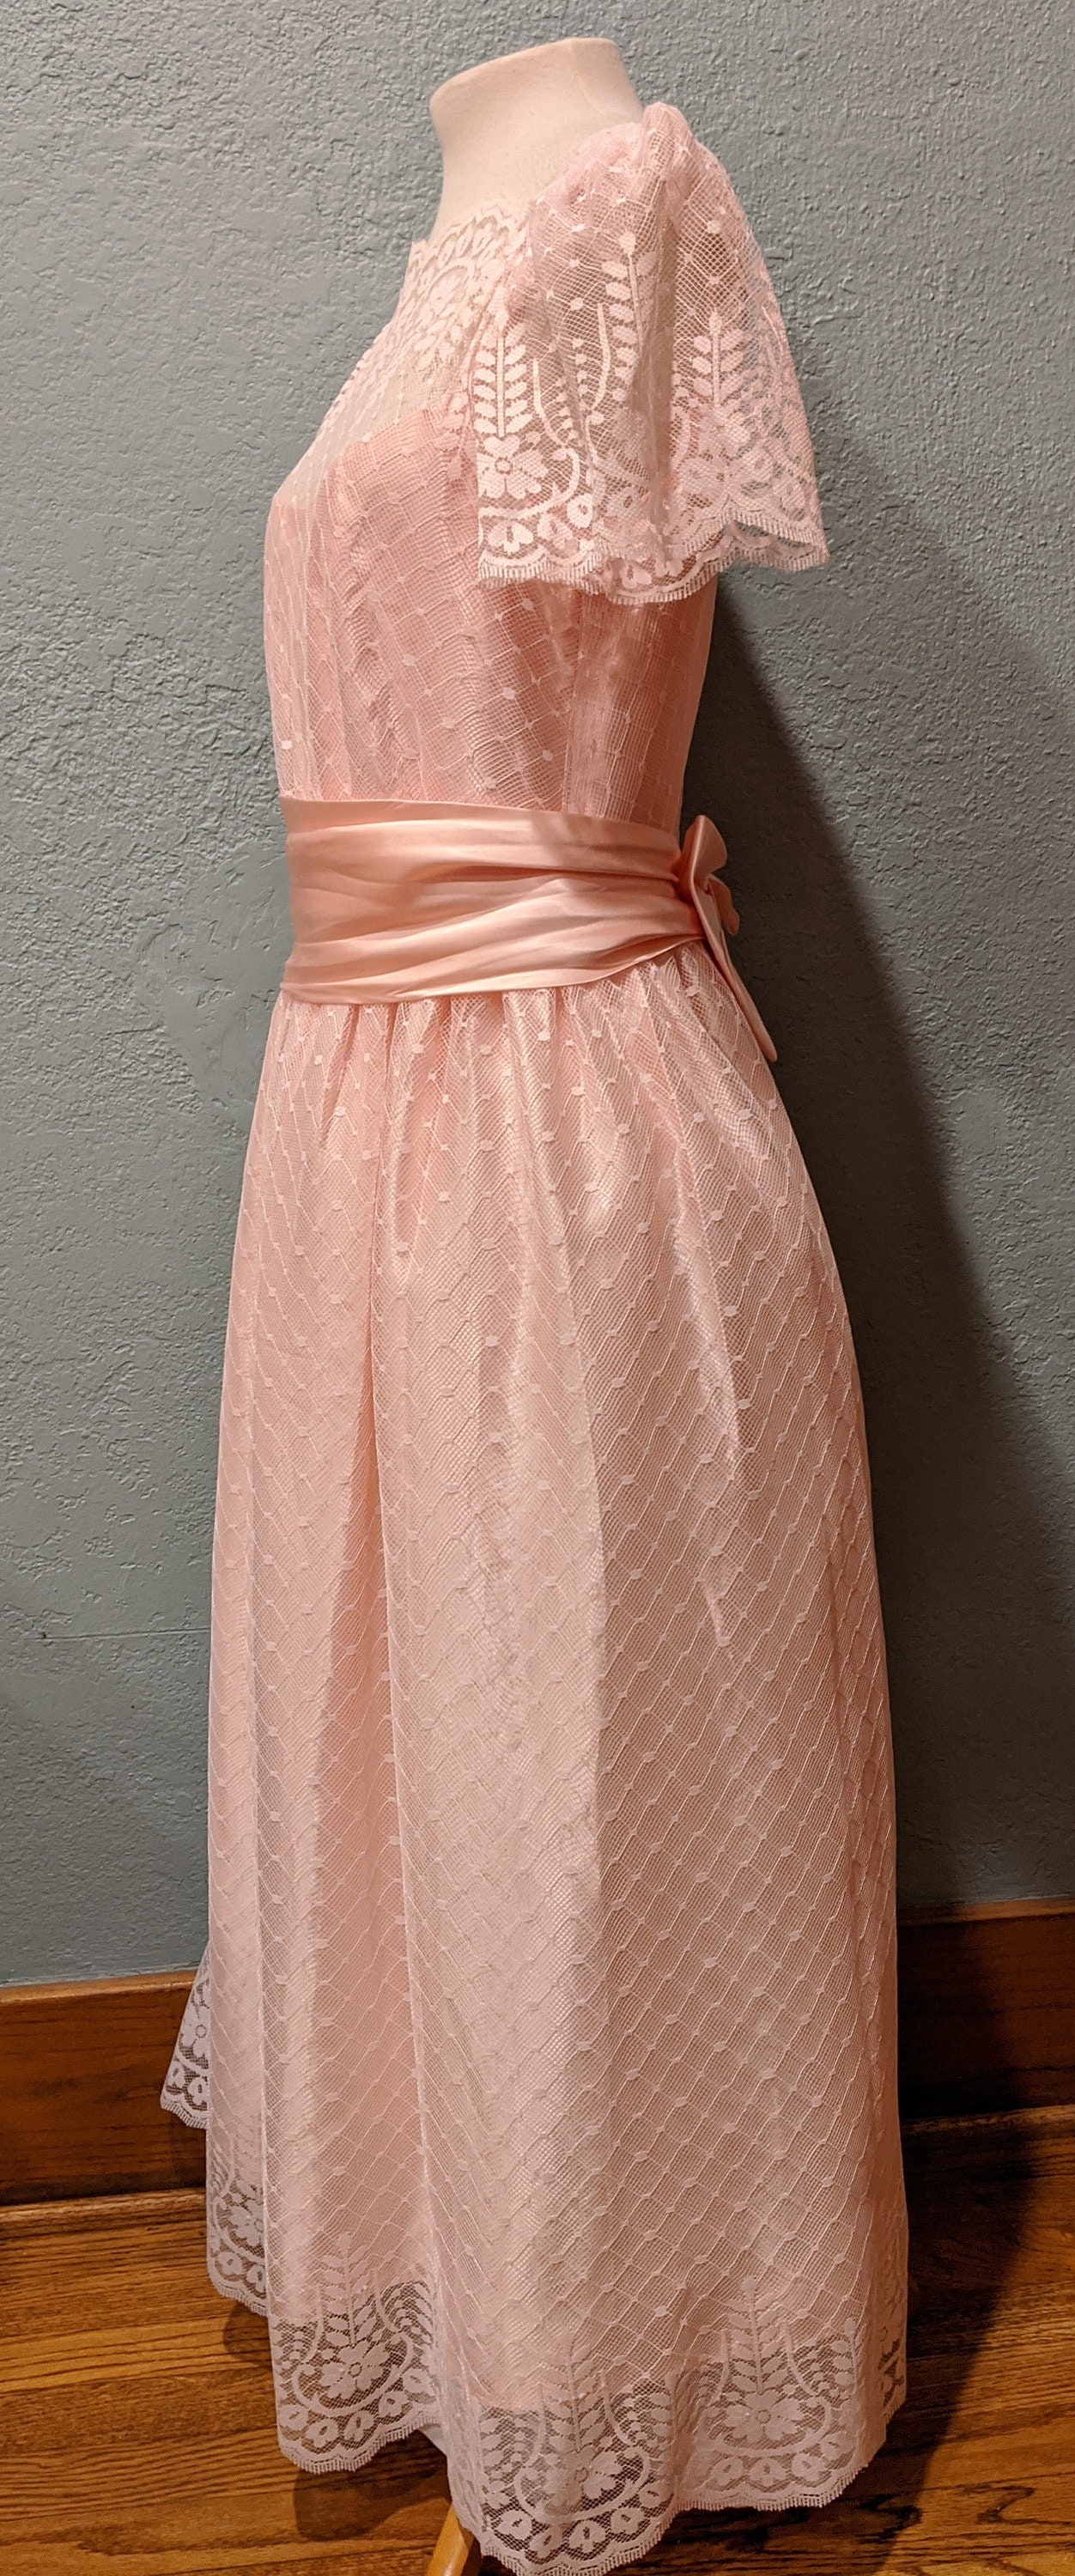 1988 JC Penney Pink Bridesmaid Dress Size 13/14 Pink Lace over a slip ...